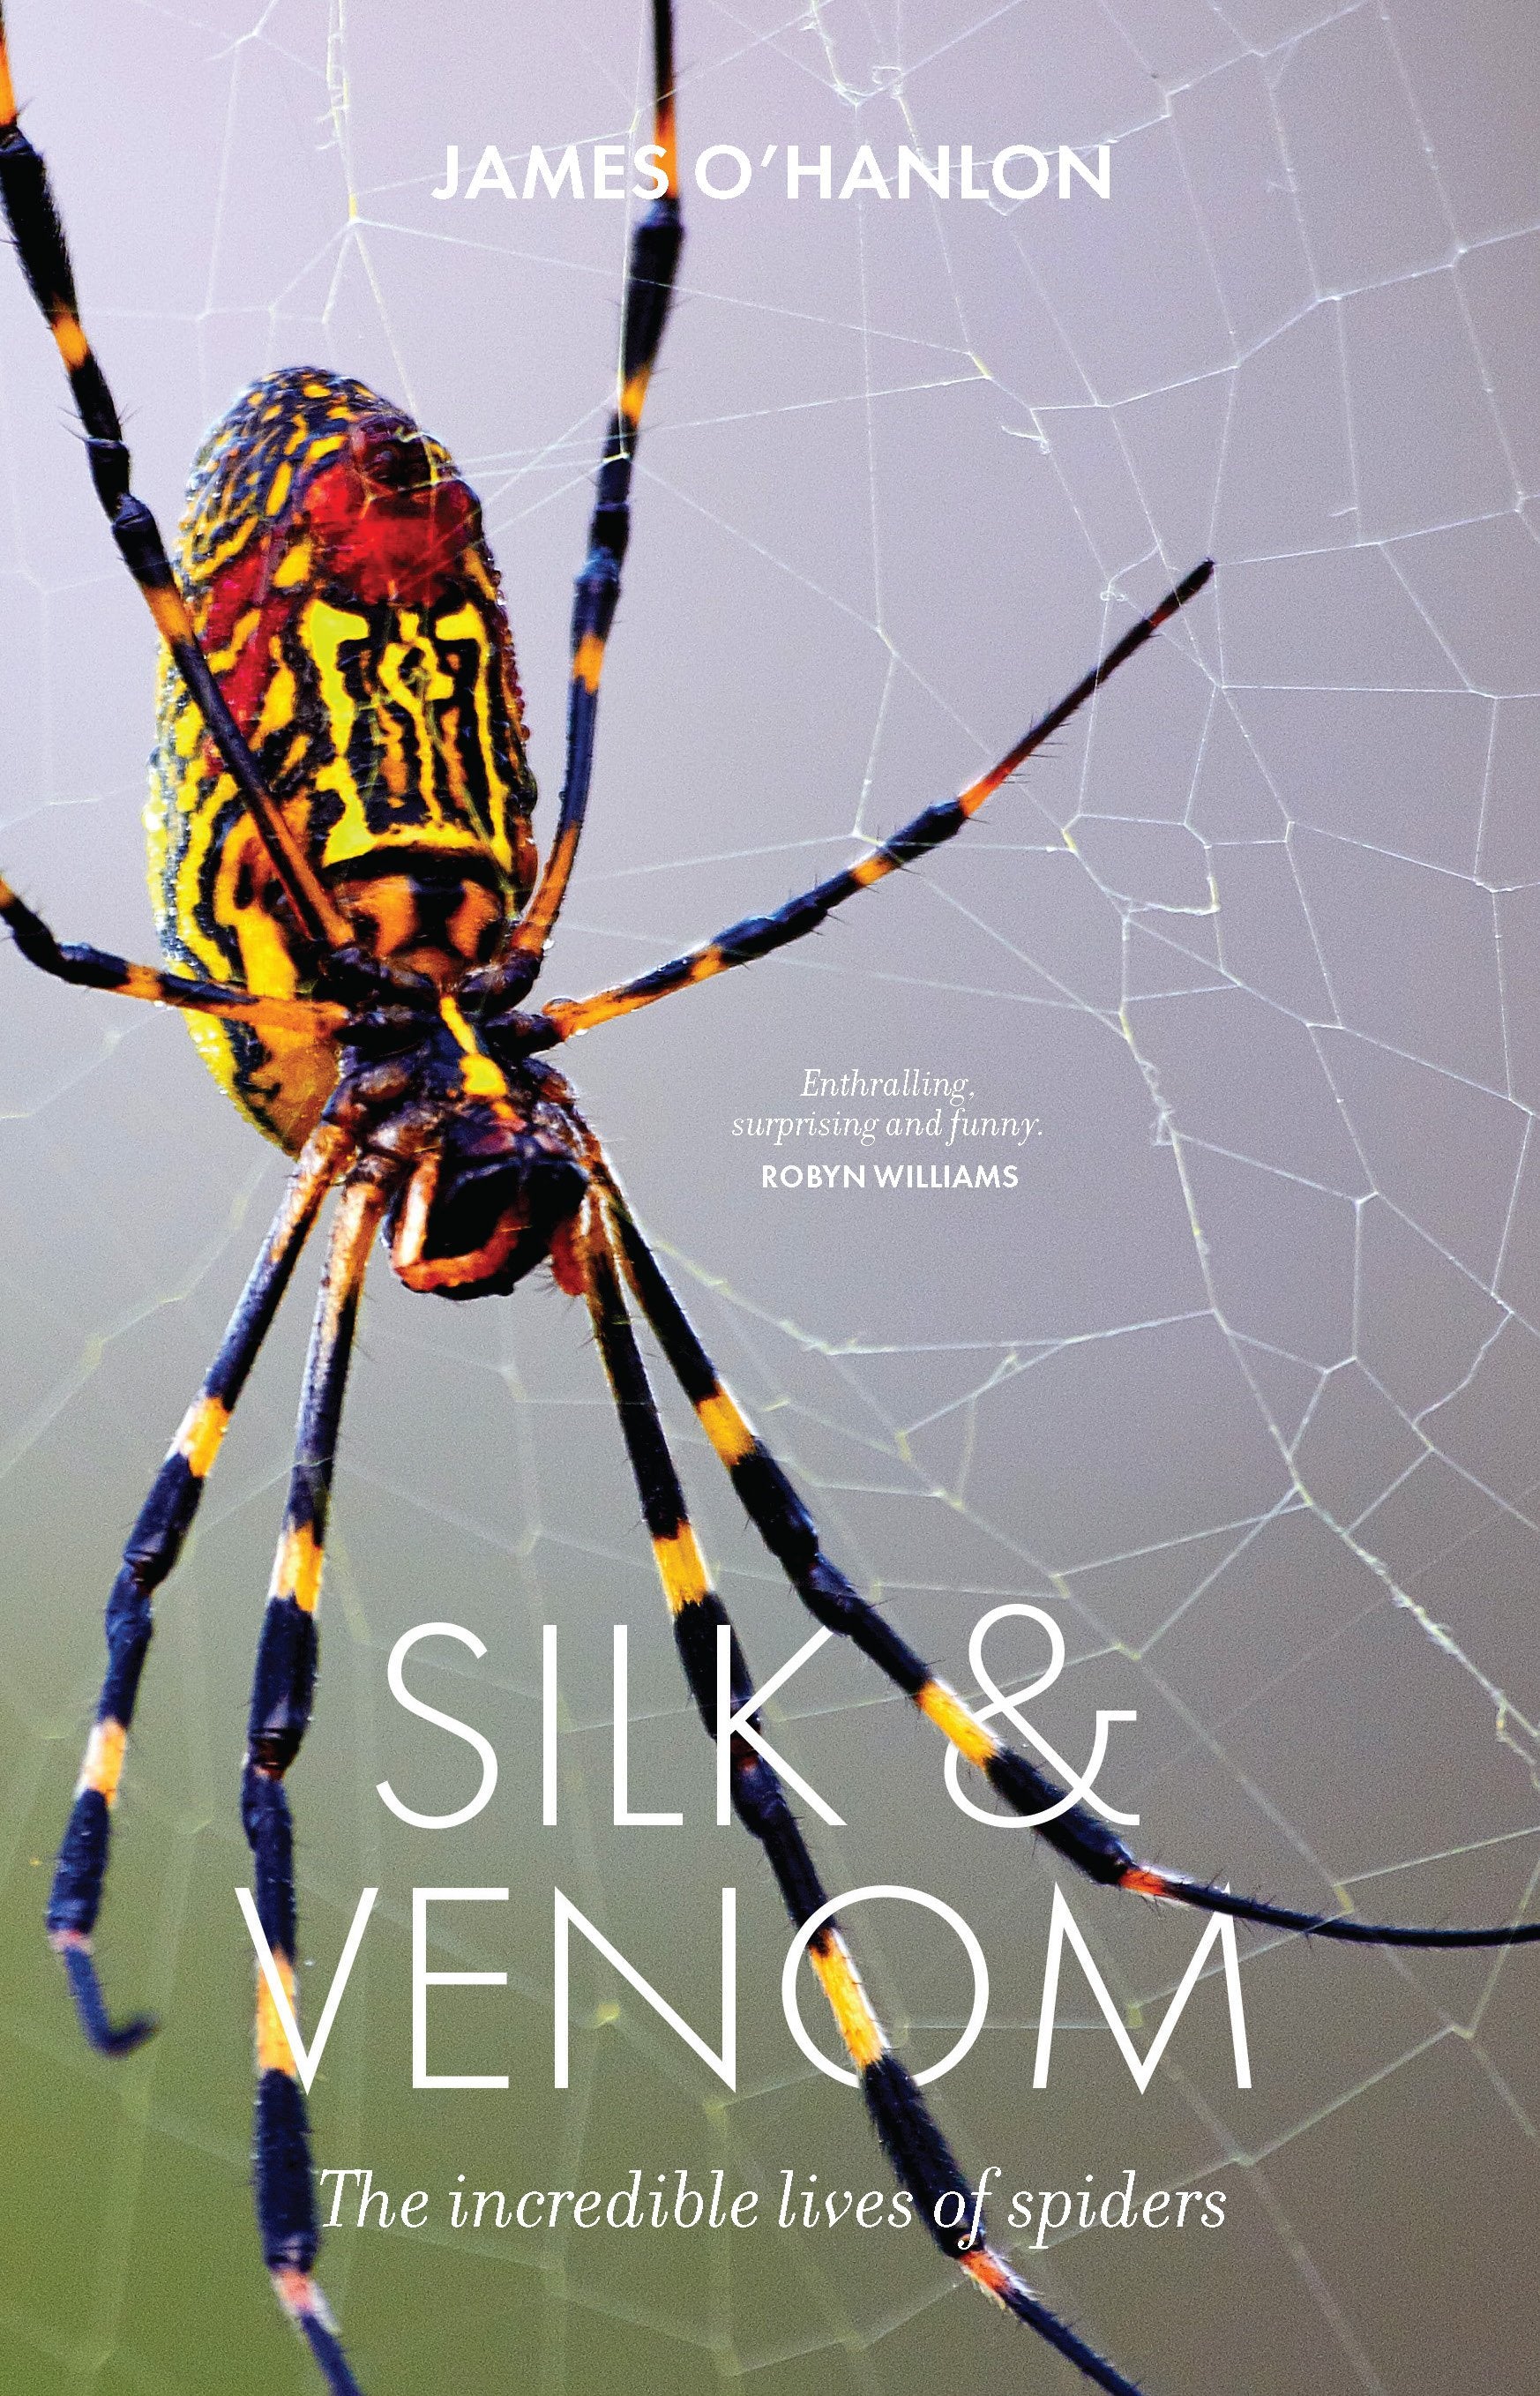 Silk & Venom The incredible lives of spiders by James O'Hanlon